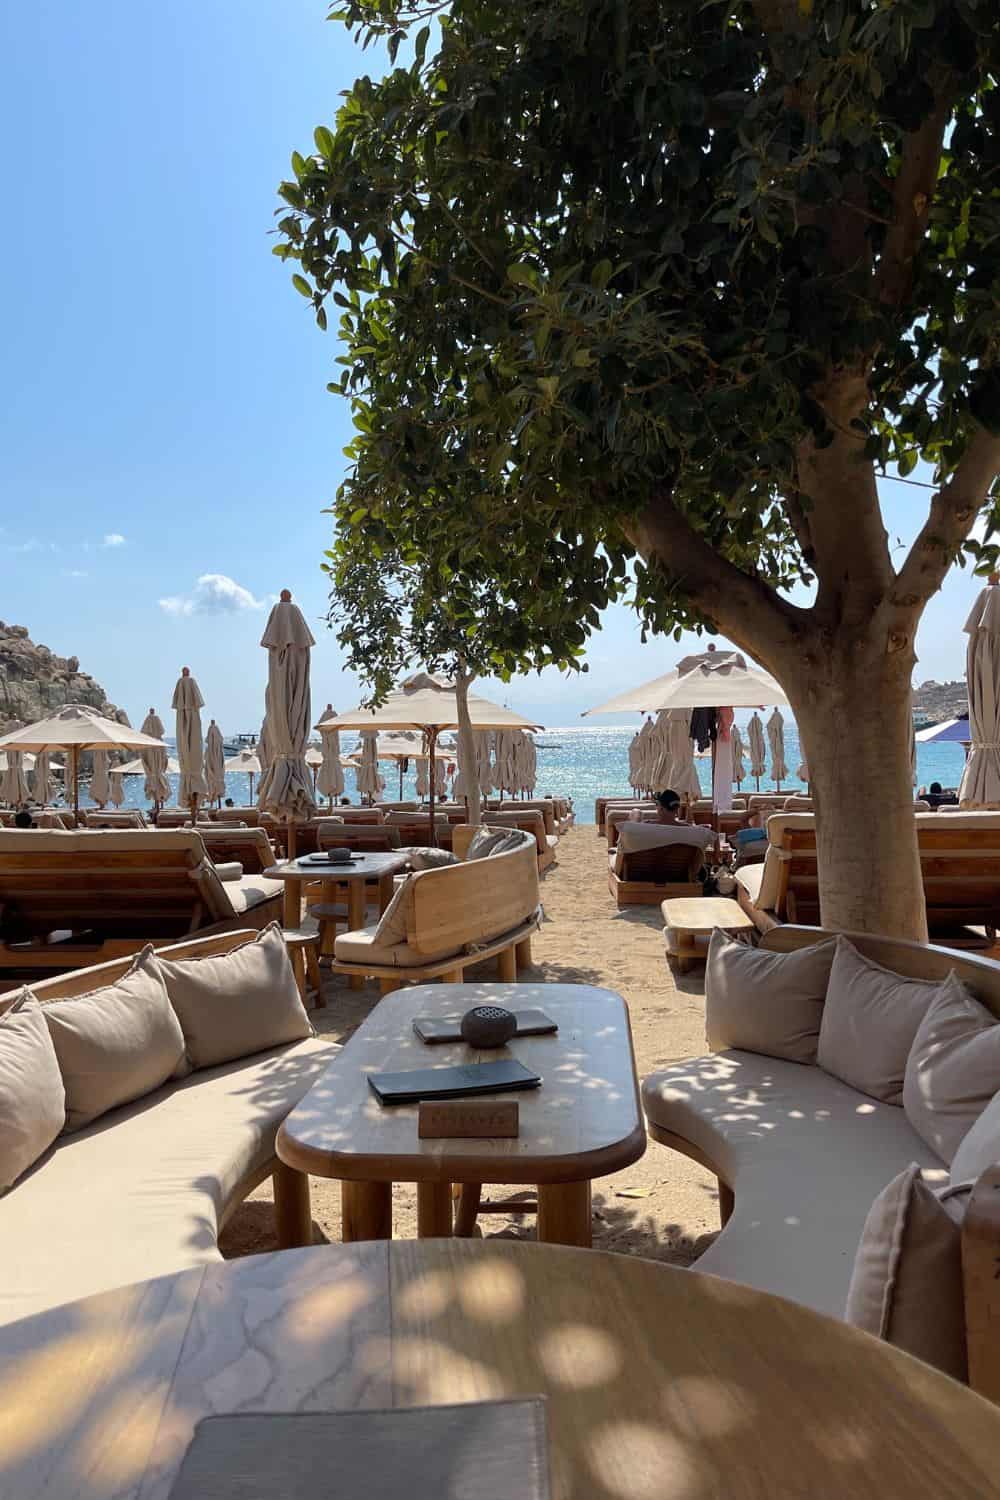 A stylish beach lounge area shaded by a large tree and equipped with comfortable seating and beige umbrellas. The setup overlooks a serene beach and clear waters, inviting relaxation in a picturesque Mediterranean setting.